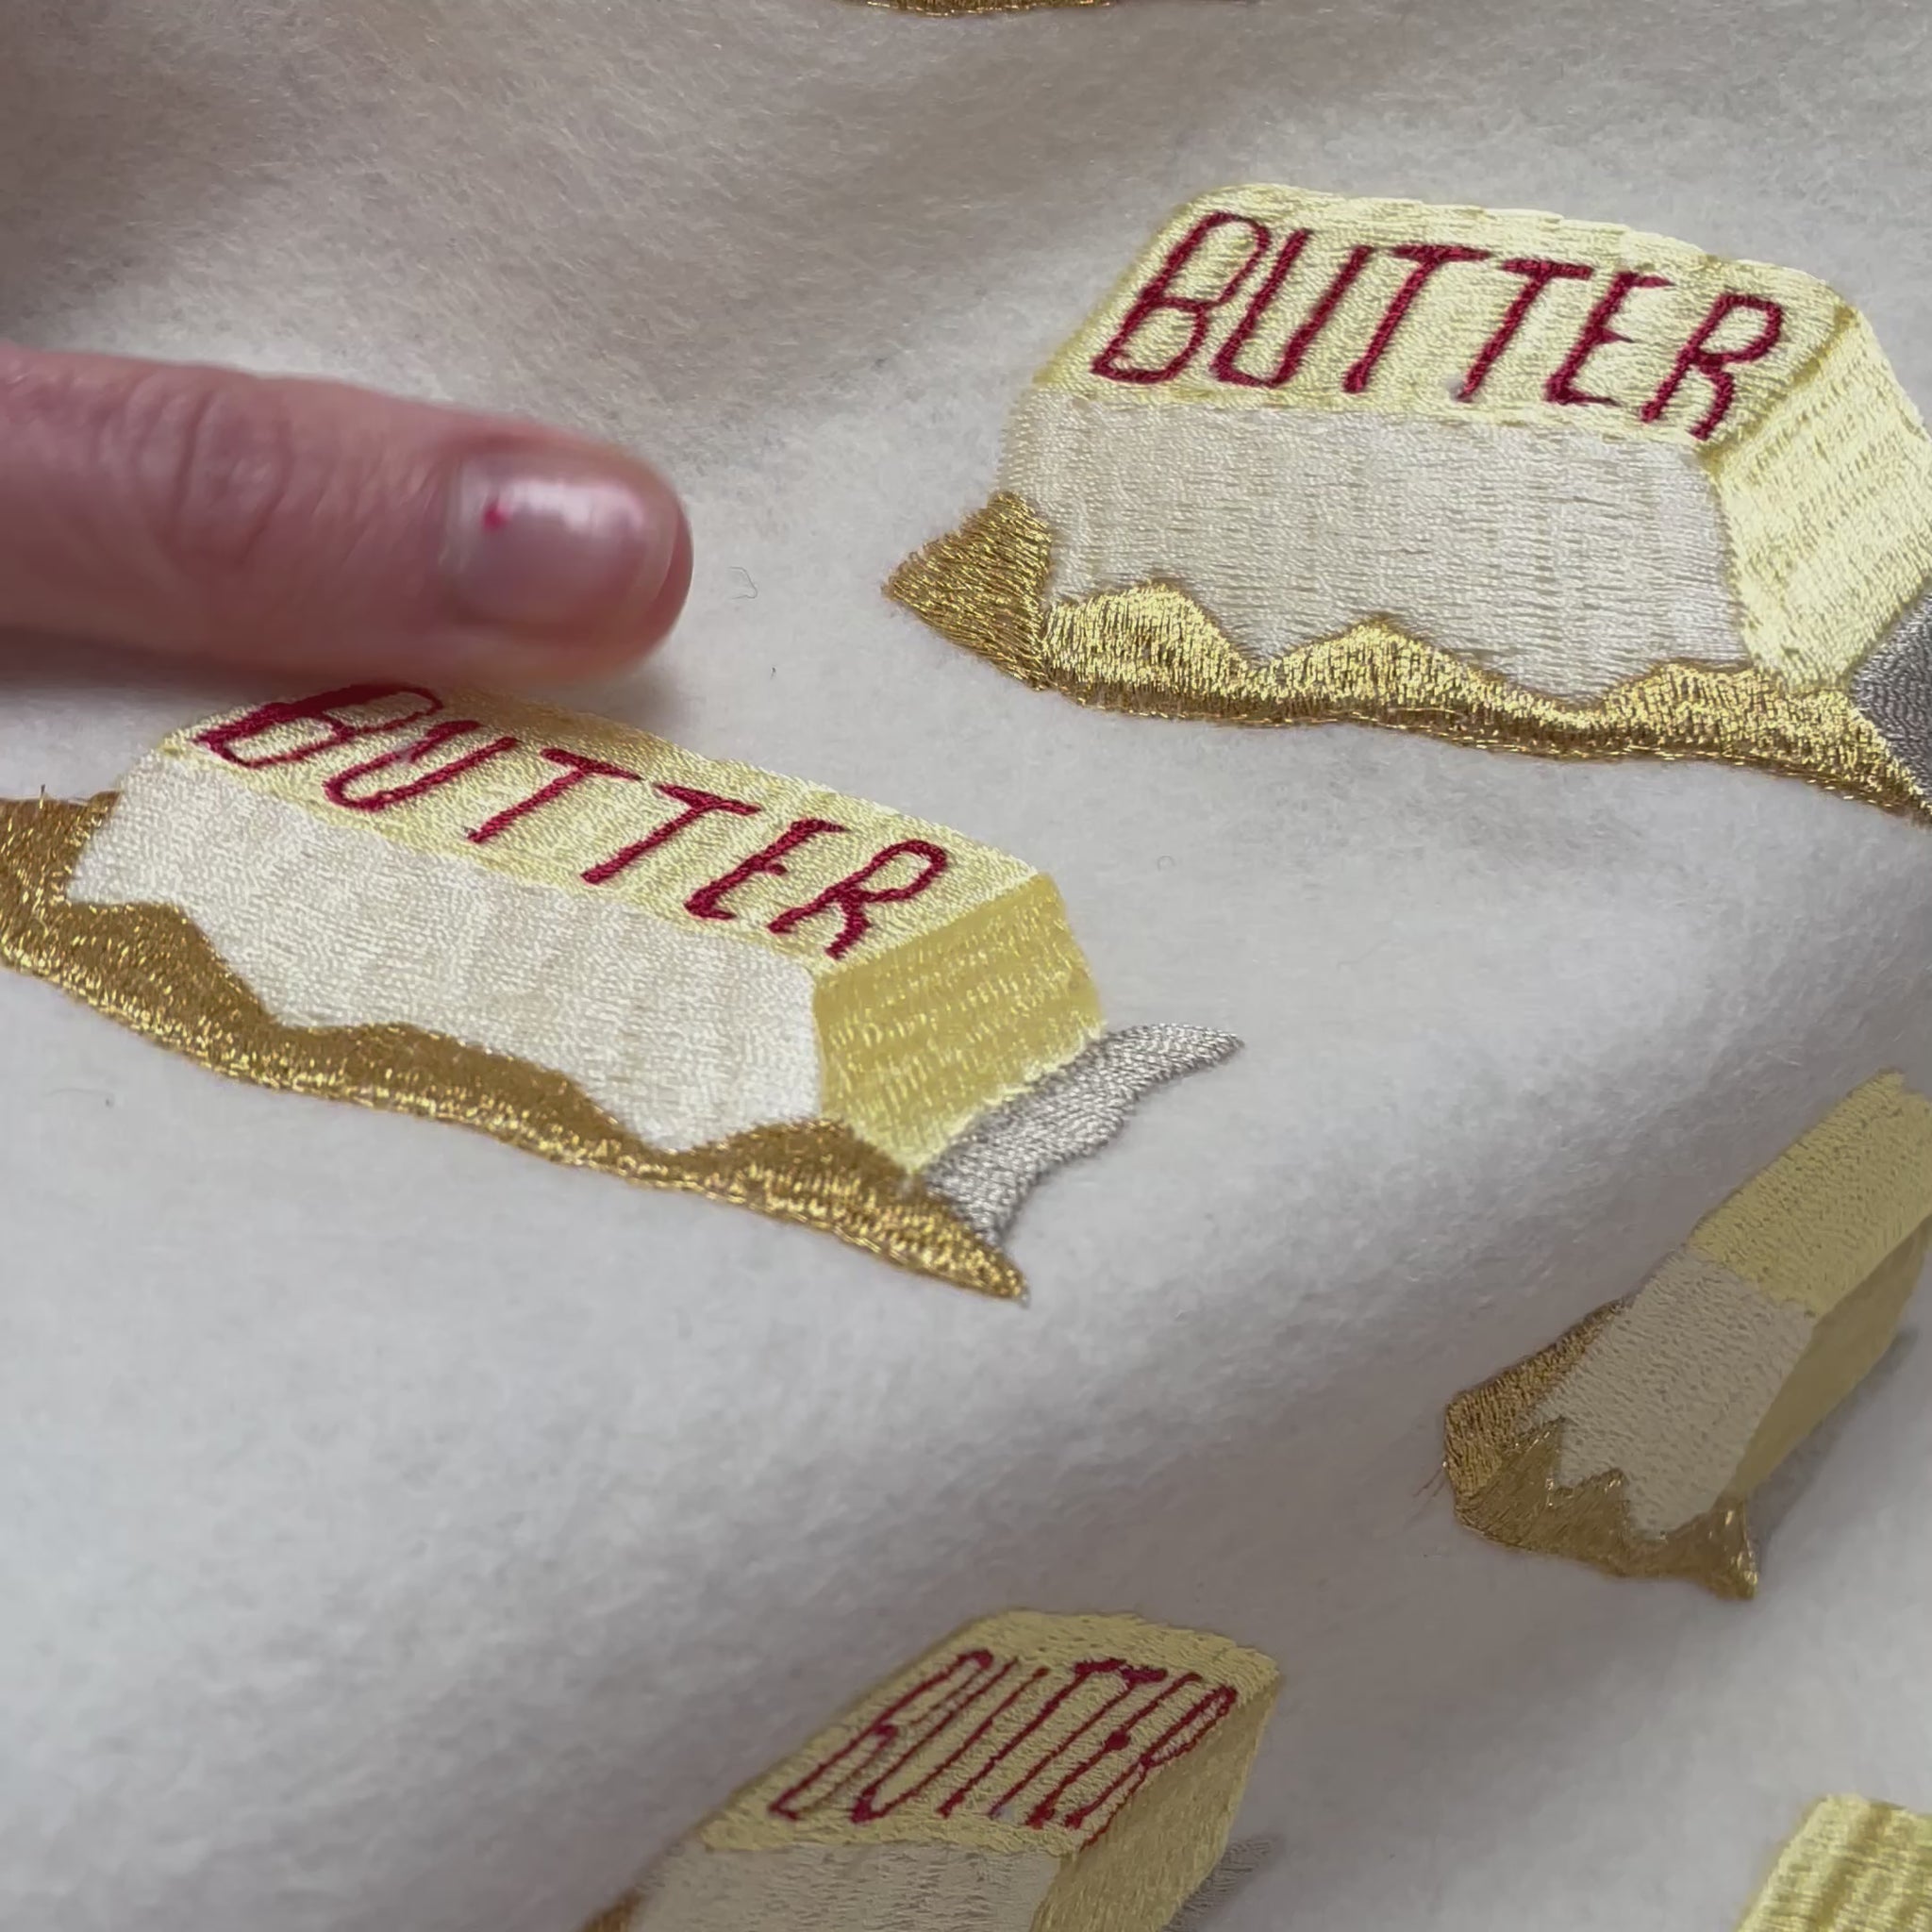 Video of embroidered butter patches